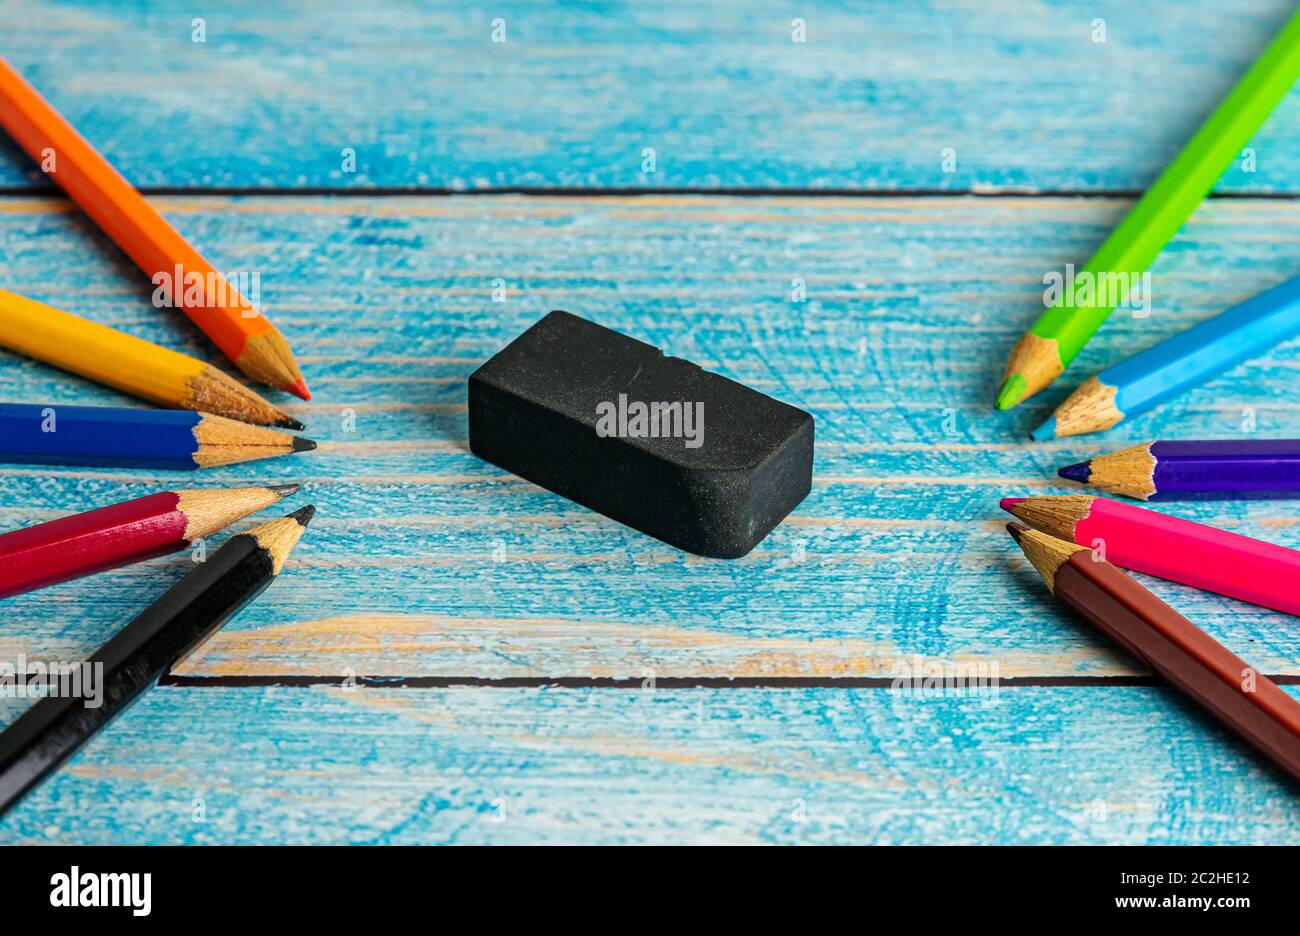 Difference And Strange Concept, All pencil colorful sharpener and eraser on blurred blue wooden table background Stock Photo